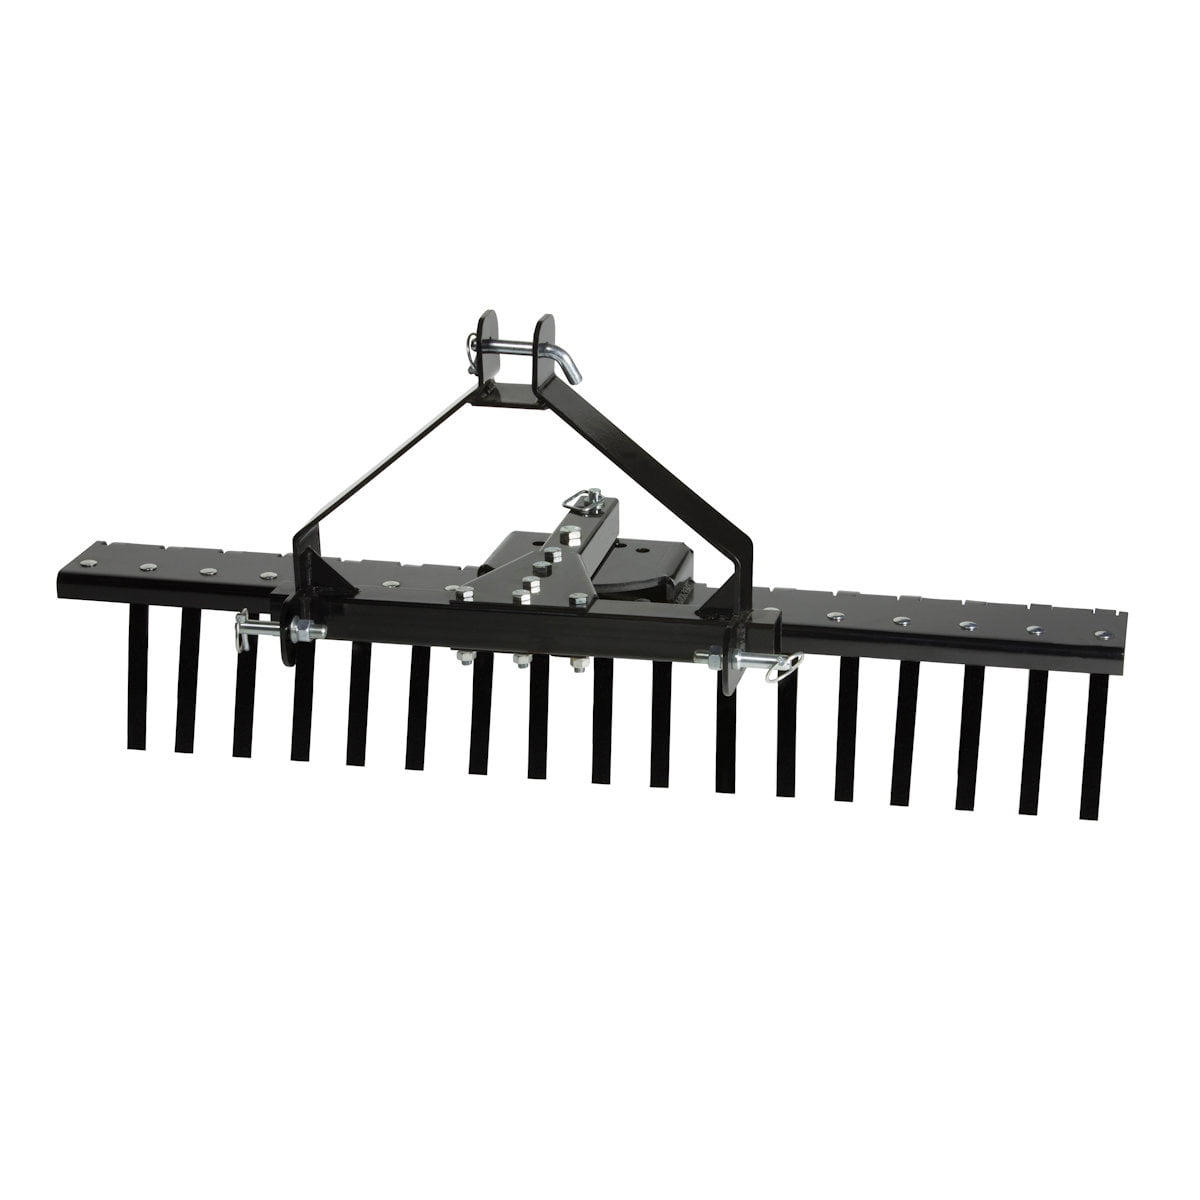 Impact Implements CAT-0 Category 0 Landscape Rake for Compact Tractors 